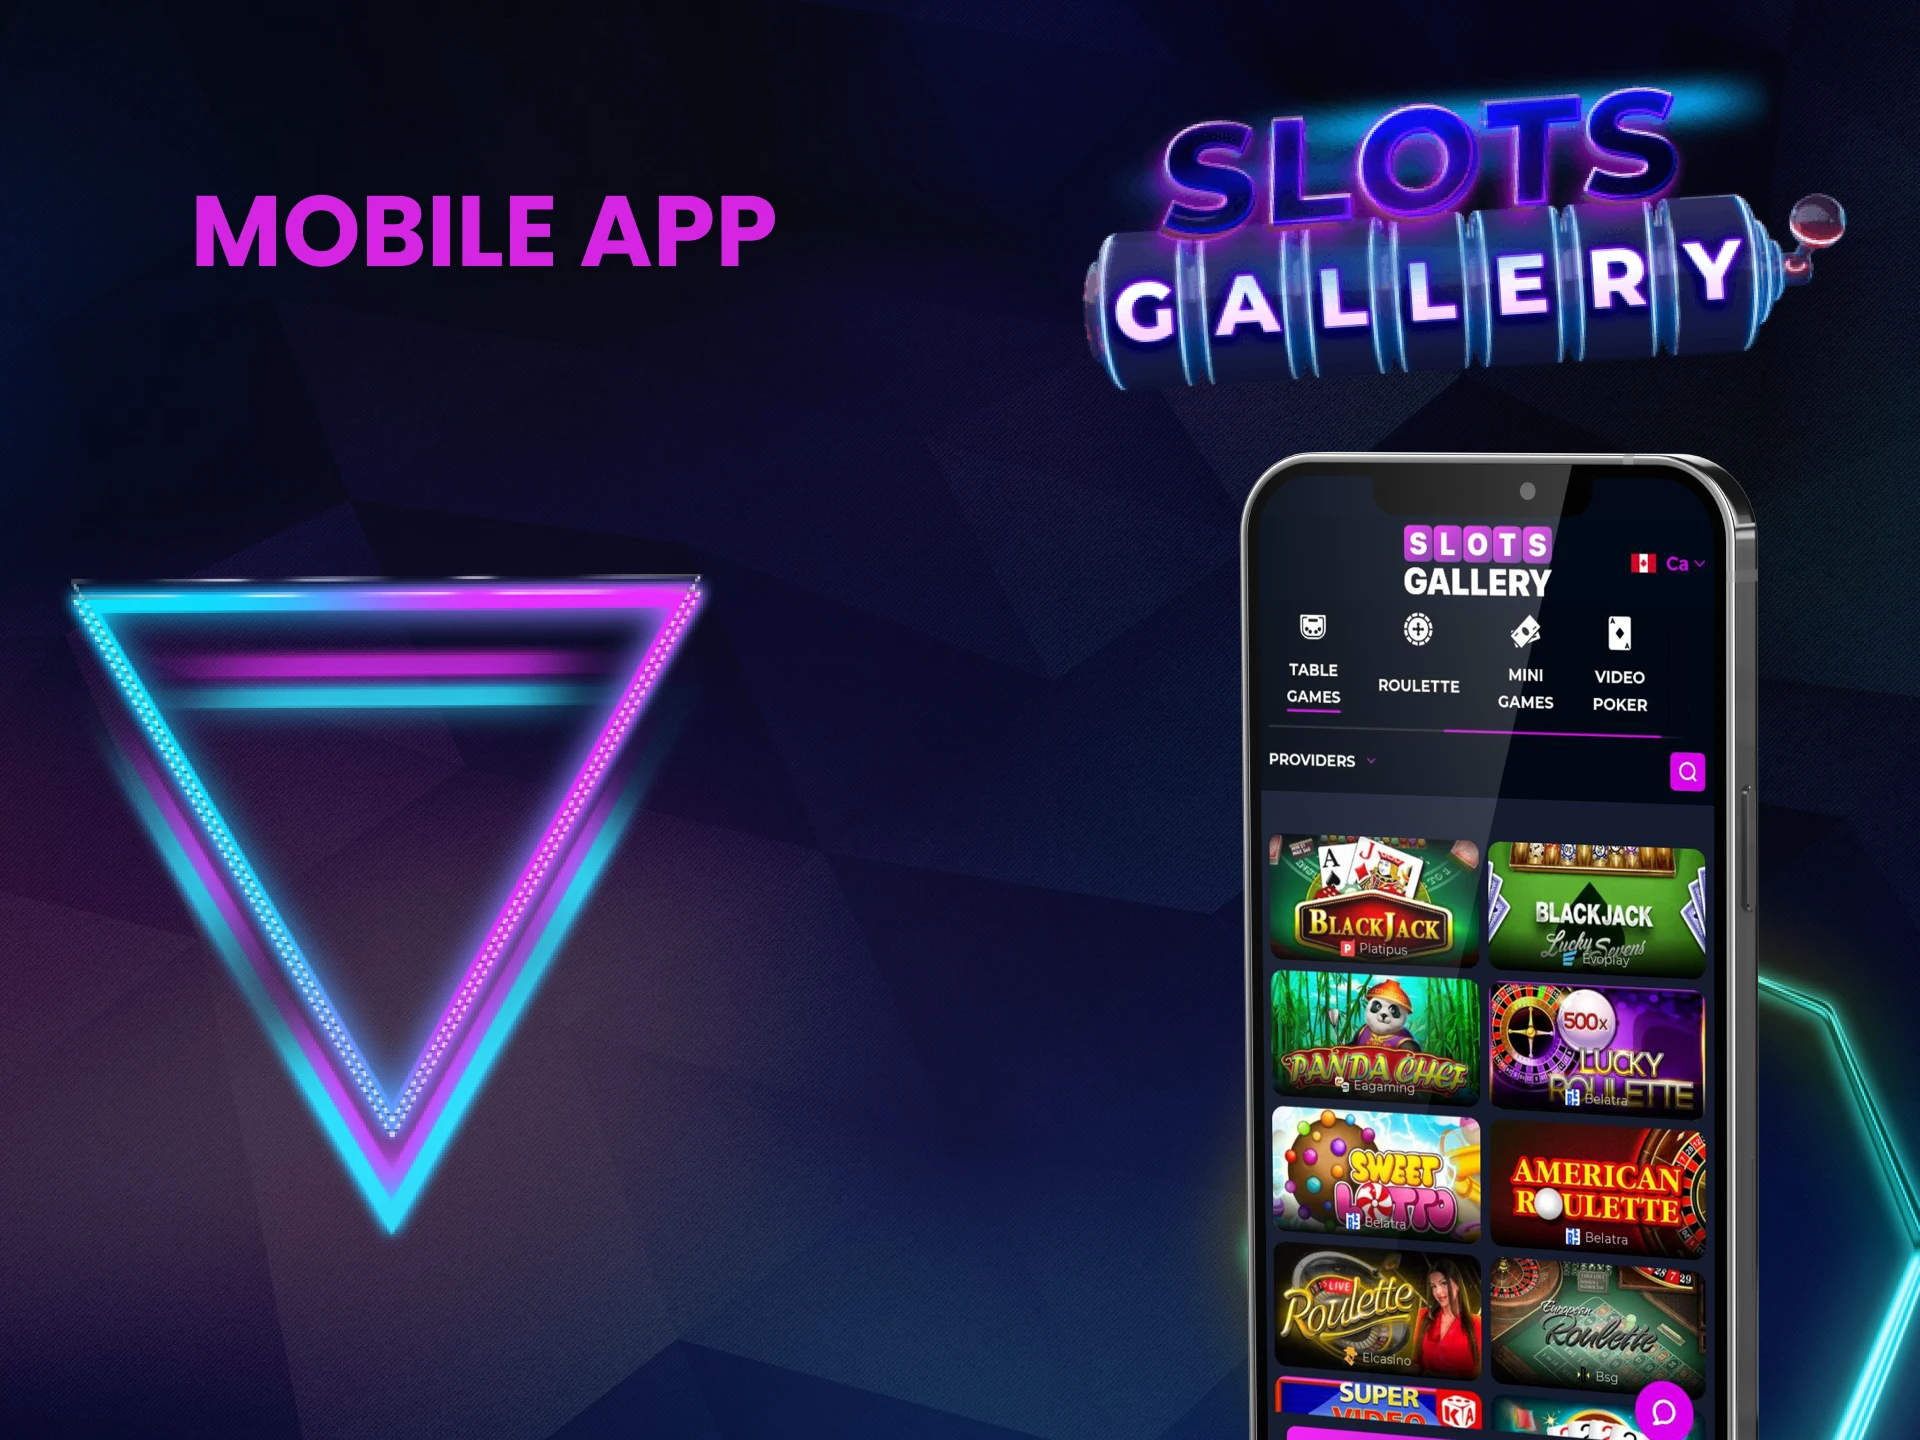 You can play table games in the Slots Gallery application.